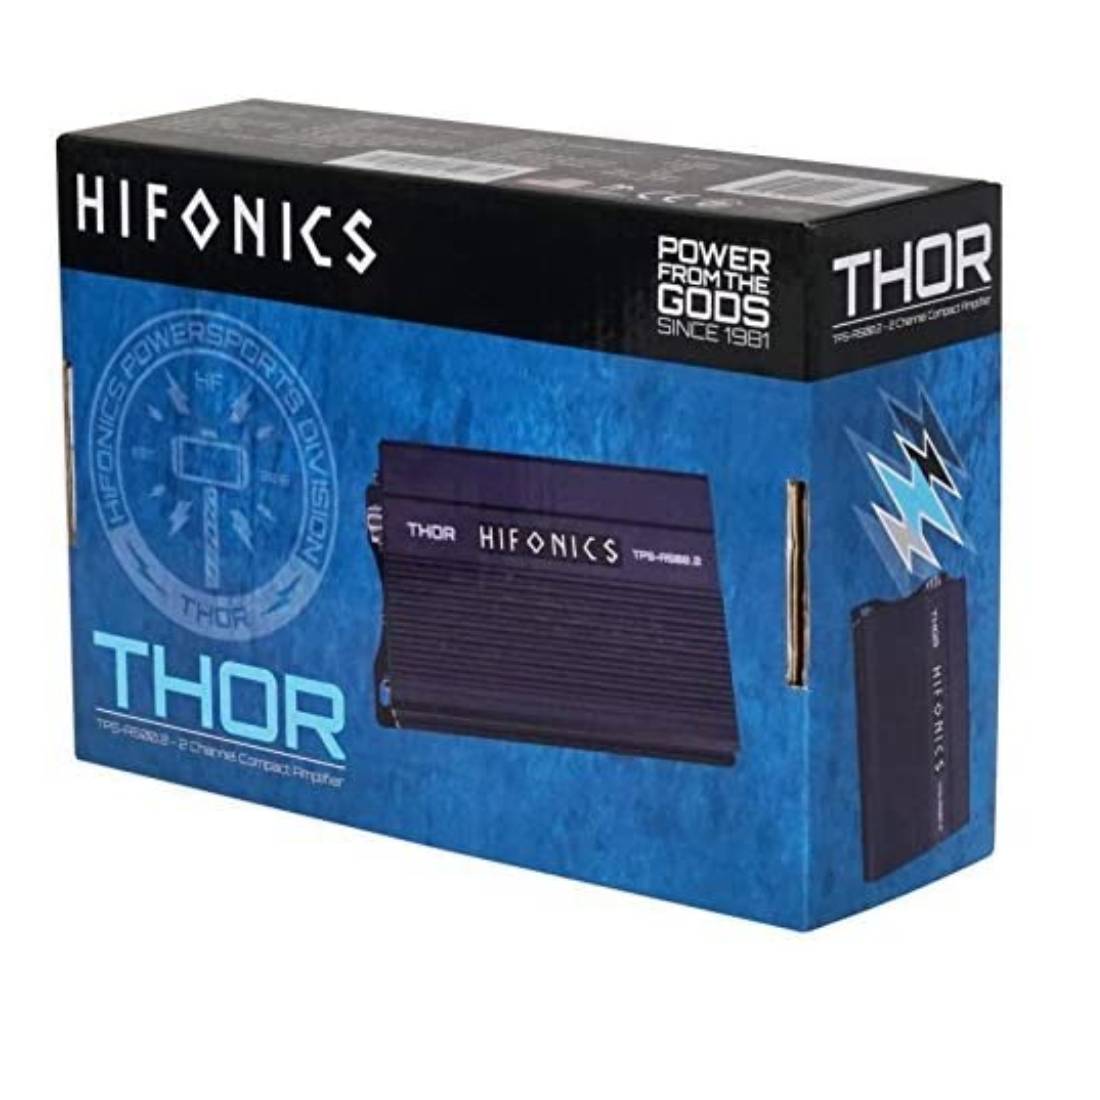 Hifonics TPS-A500.2 500 Watts Max 2-Ohm Stable 2-Channel THOR Powersports Car Audio Amplifier